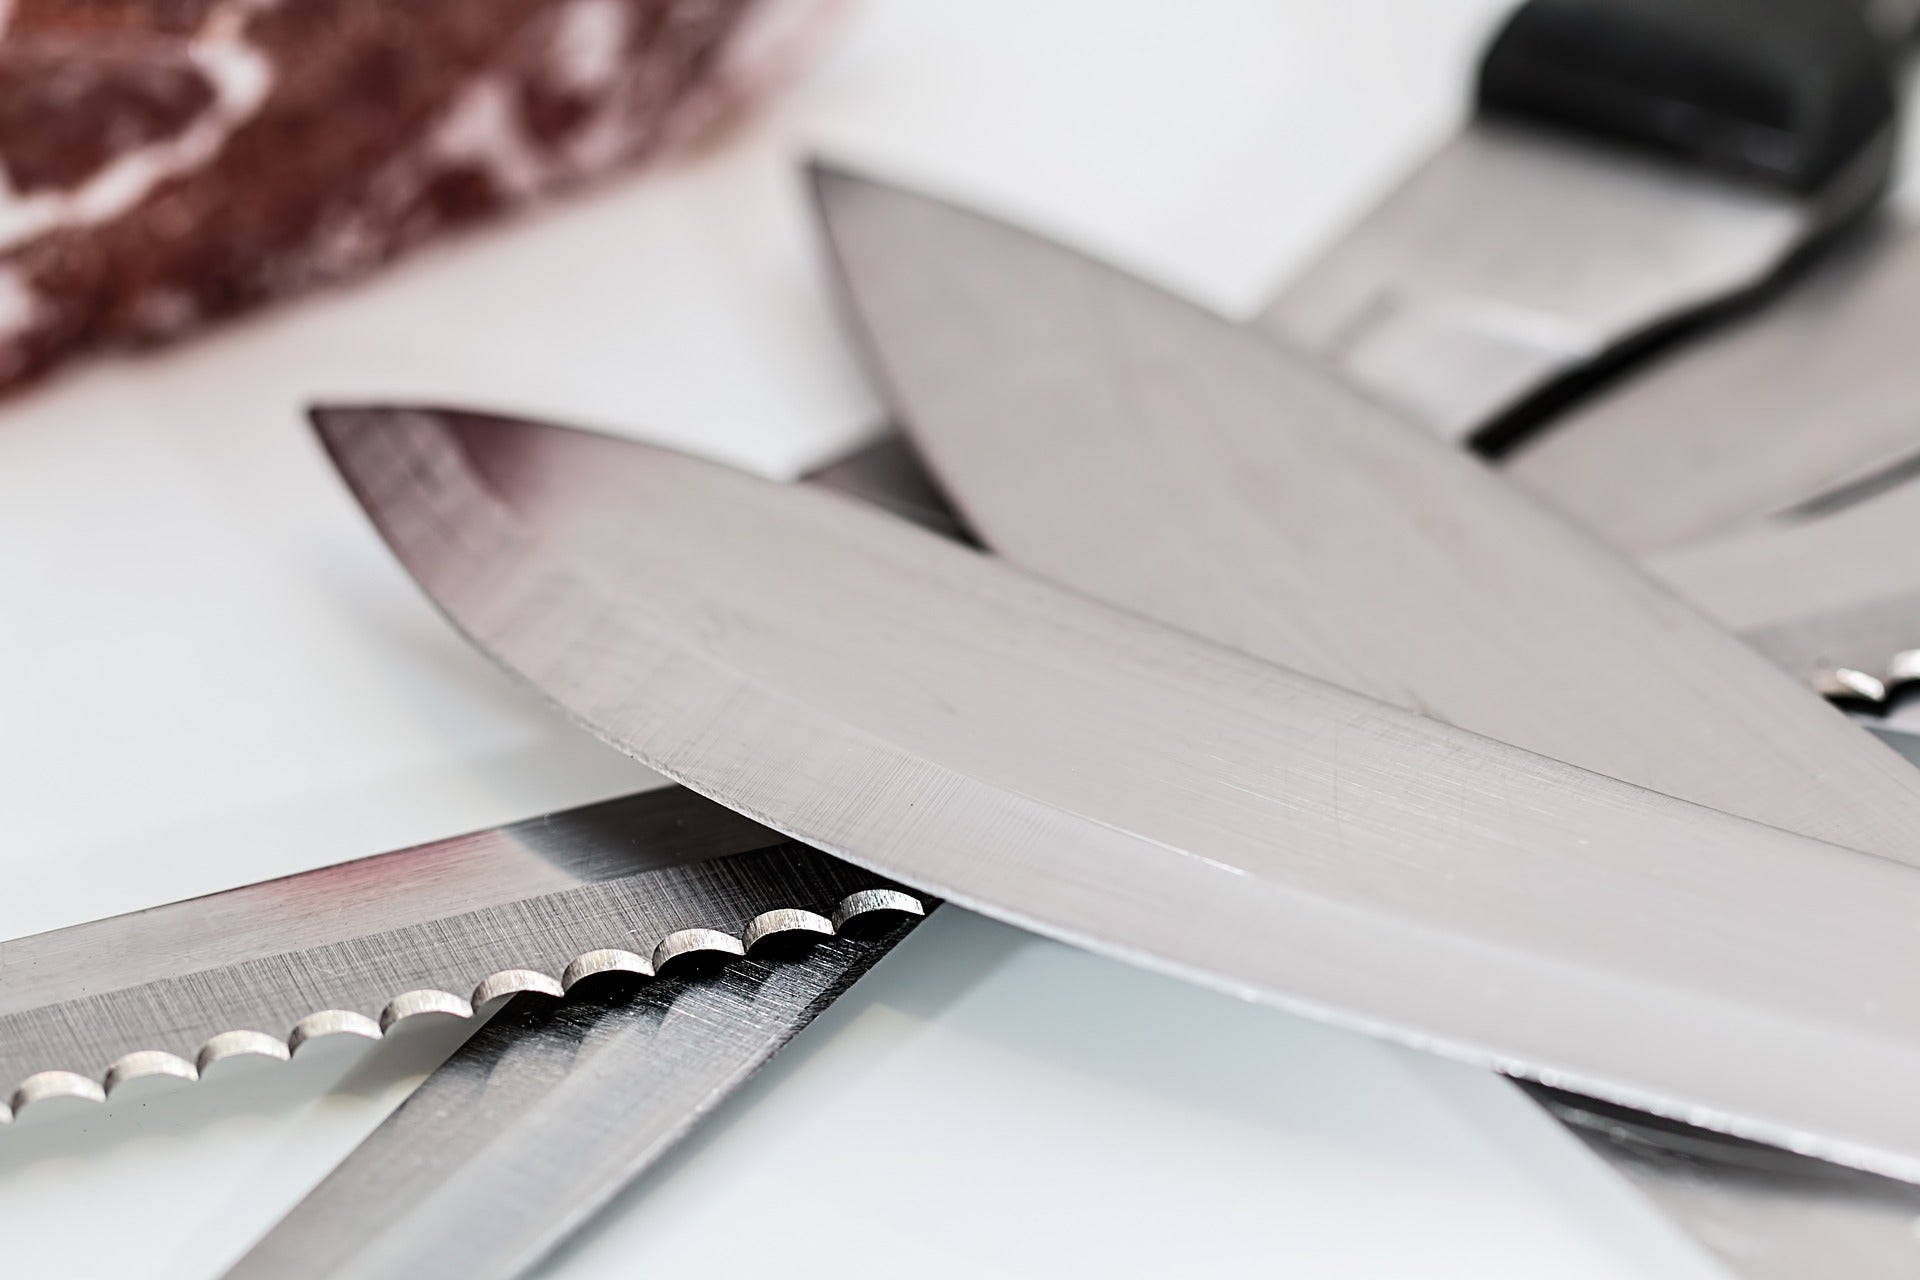 How to sharpen a kitchen knife